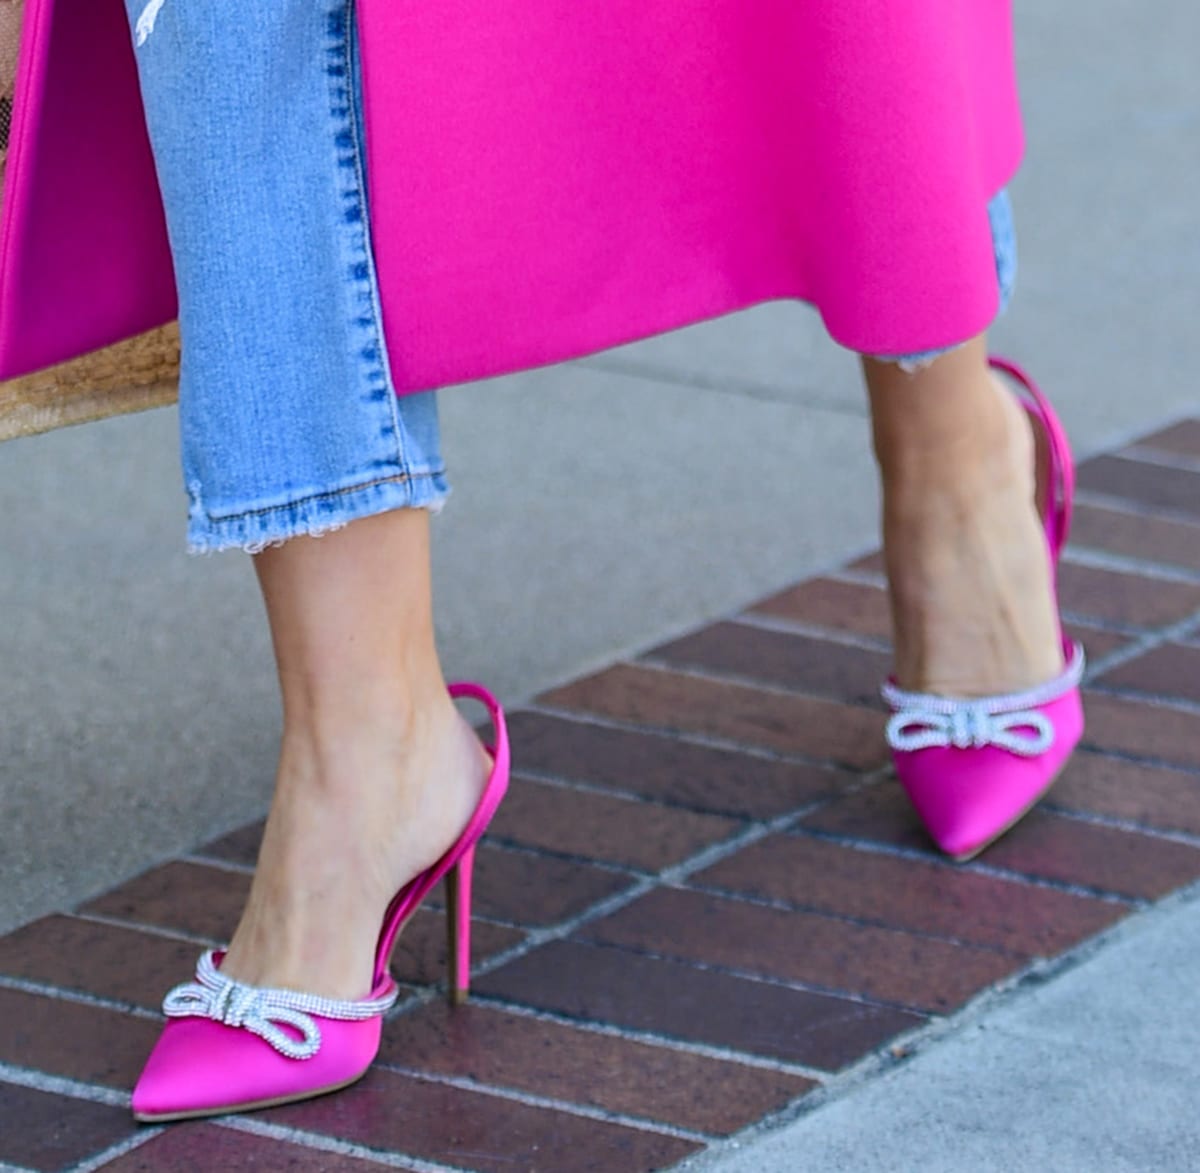 Sofia Vergara coordinates her coat with her Mach & Mach hot pink slingback pumps with rhinestone-embellished bow